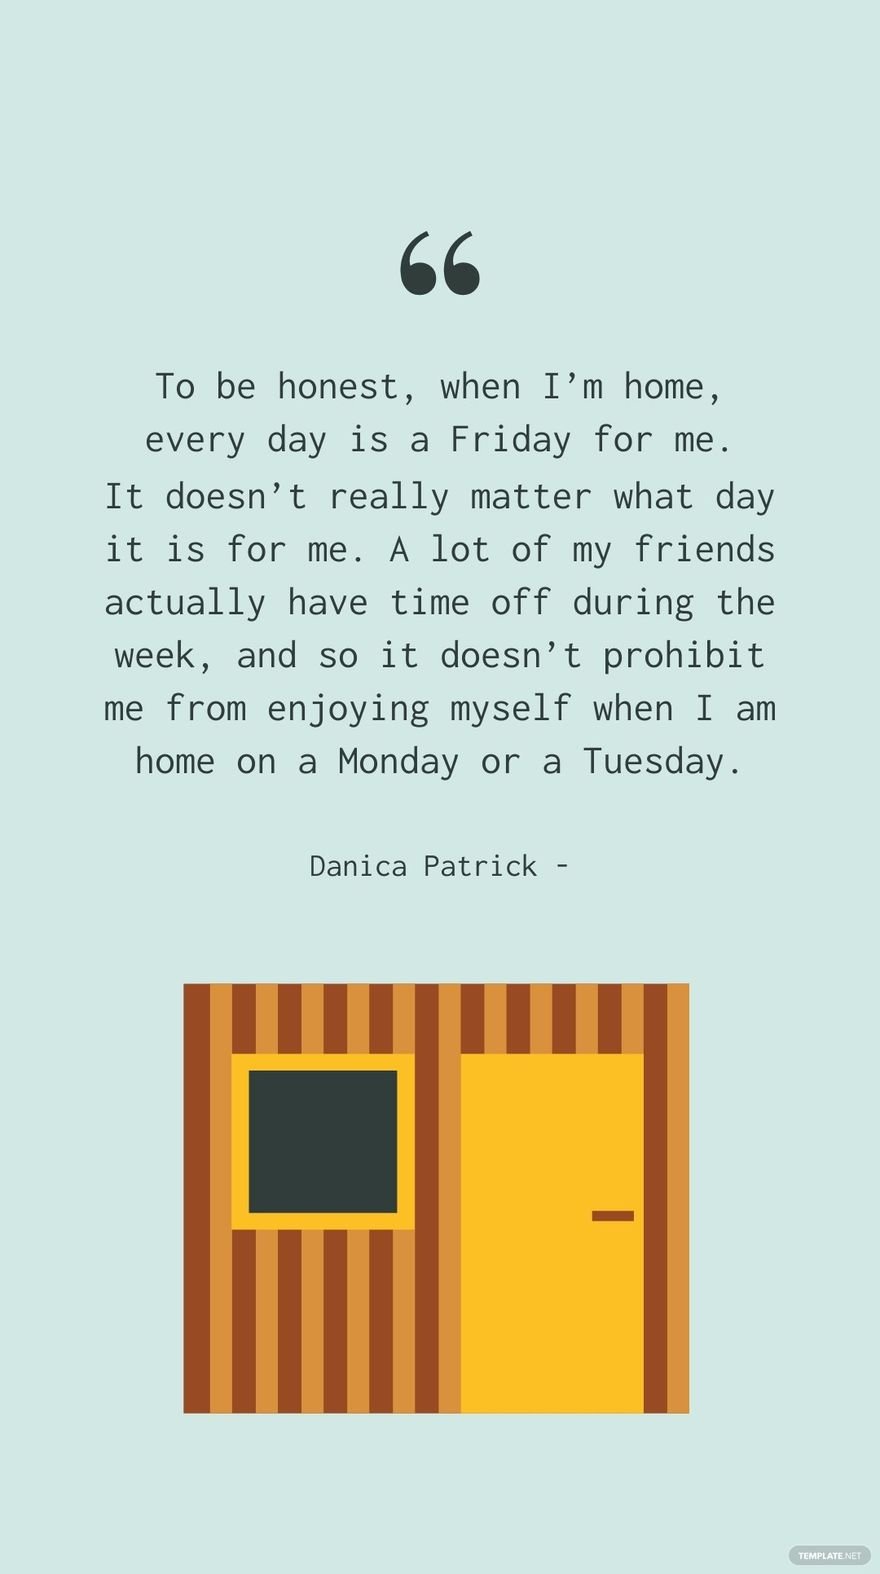 Danica Patrick - To be honest, when I’m home, every day is a Friday for me. It doesn’t really matter what day it is for me. A lot of my friends actually have time off during the week, and so it doesn’